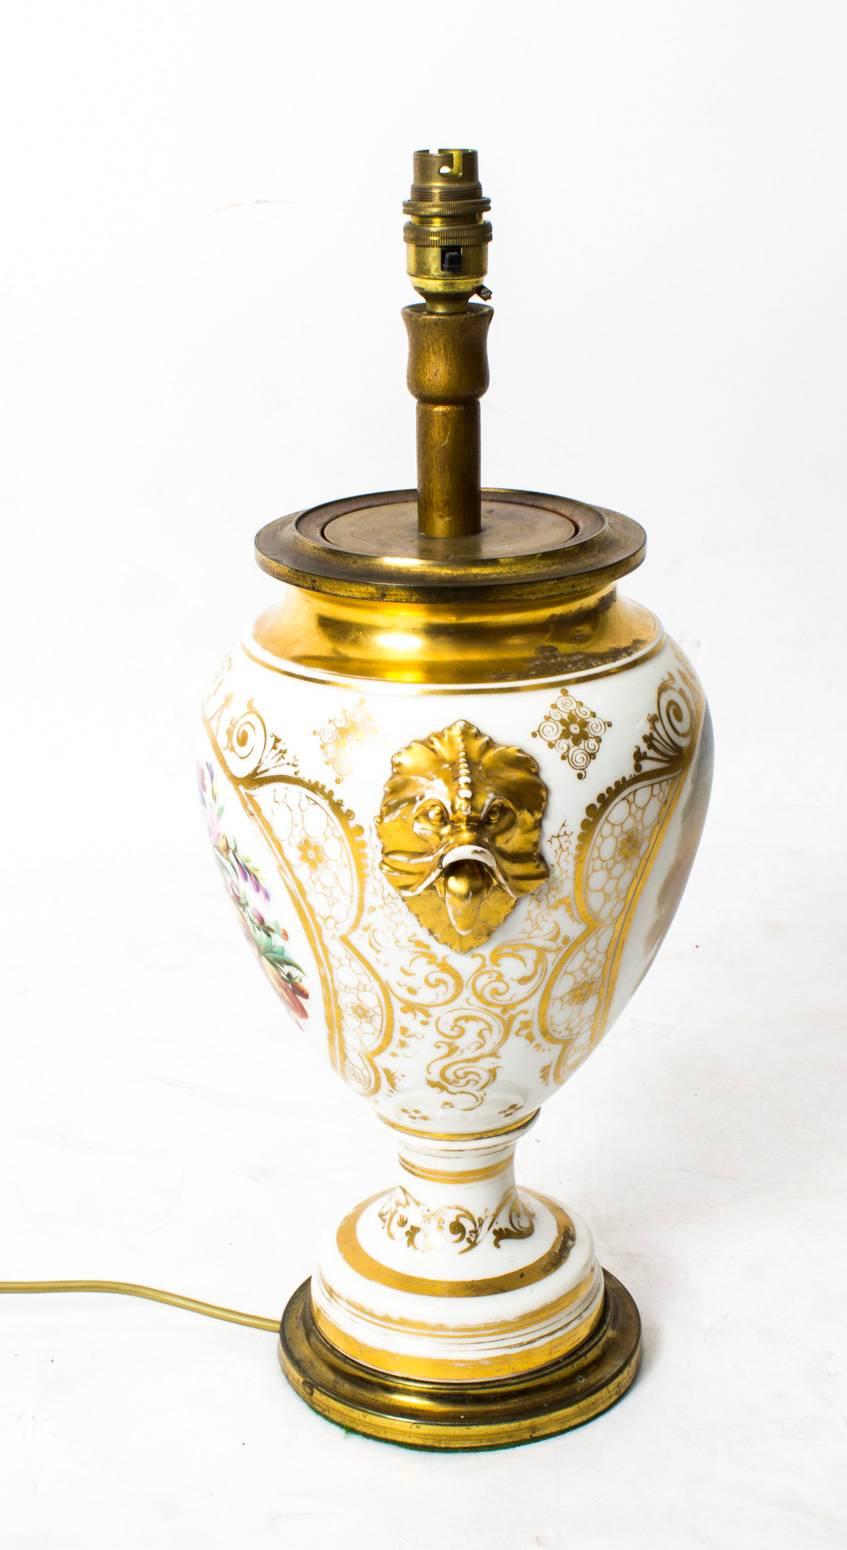 19th Century French Hand-Painted and Gilt Porcelain Lamp For Sale 1